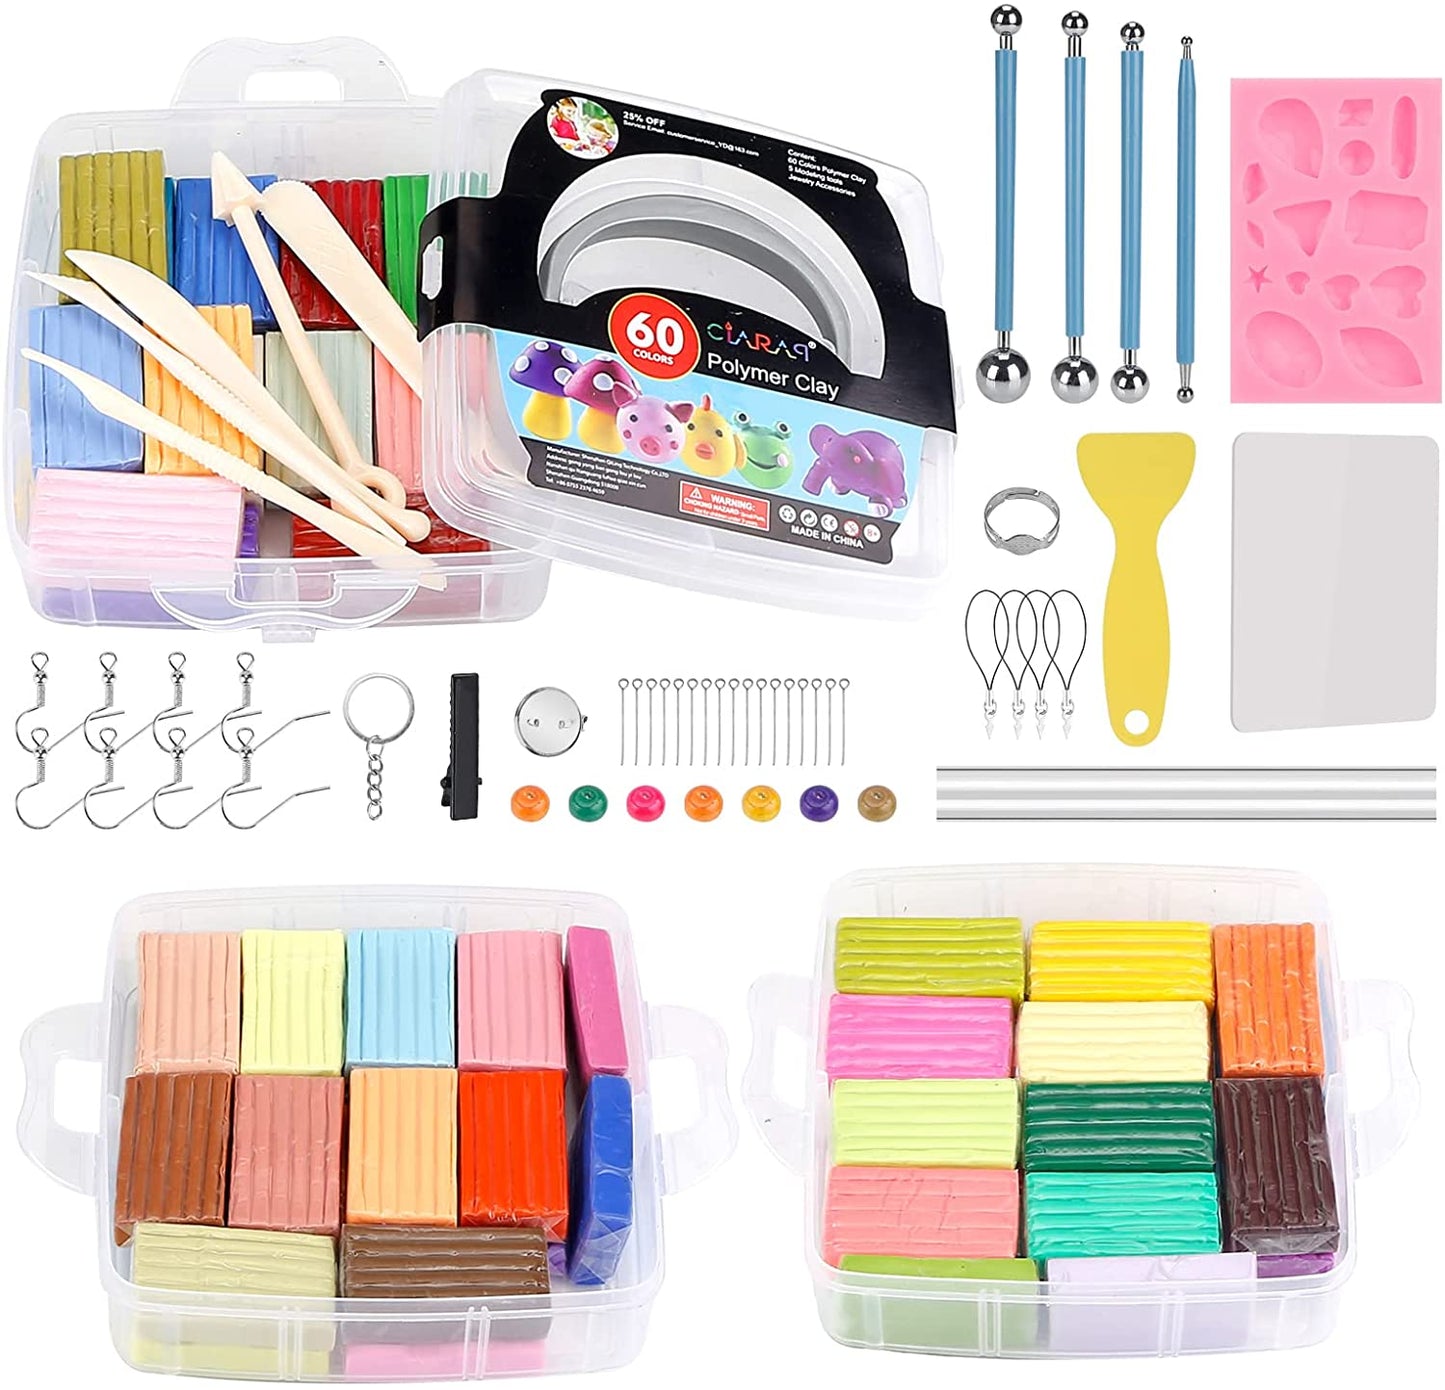 Shop Polymer Clay Kit, Oven Bake Modeling Clay for Adults and Kids, Polymer  Clay Starter Kit, Modeling Clay Set, Non-Toxic DIY Modeling Clay Assorted  with Sculpting Tools. Great for Kids, Beginners, Artists 